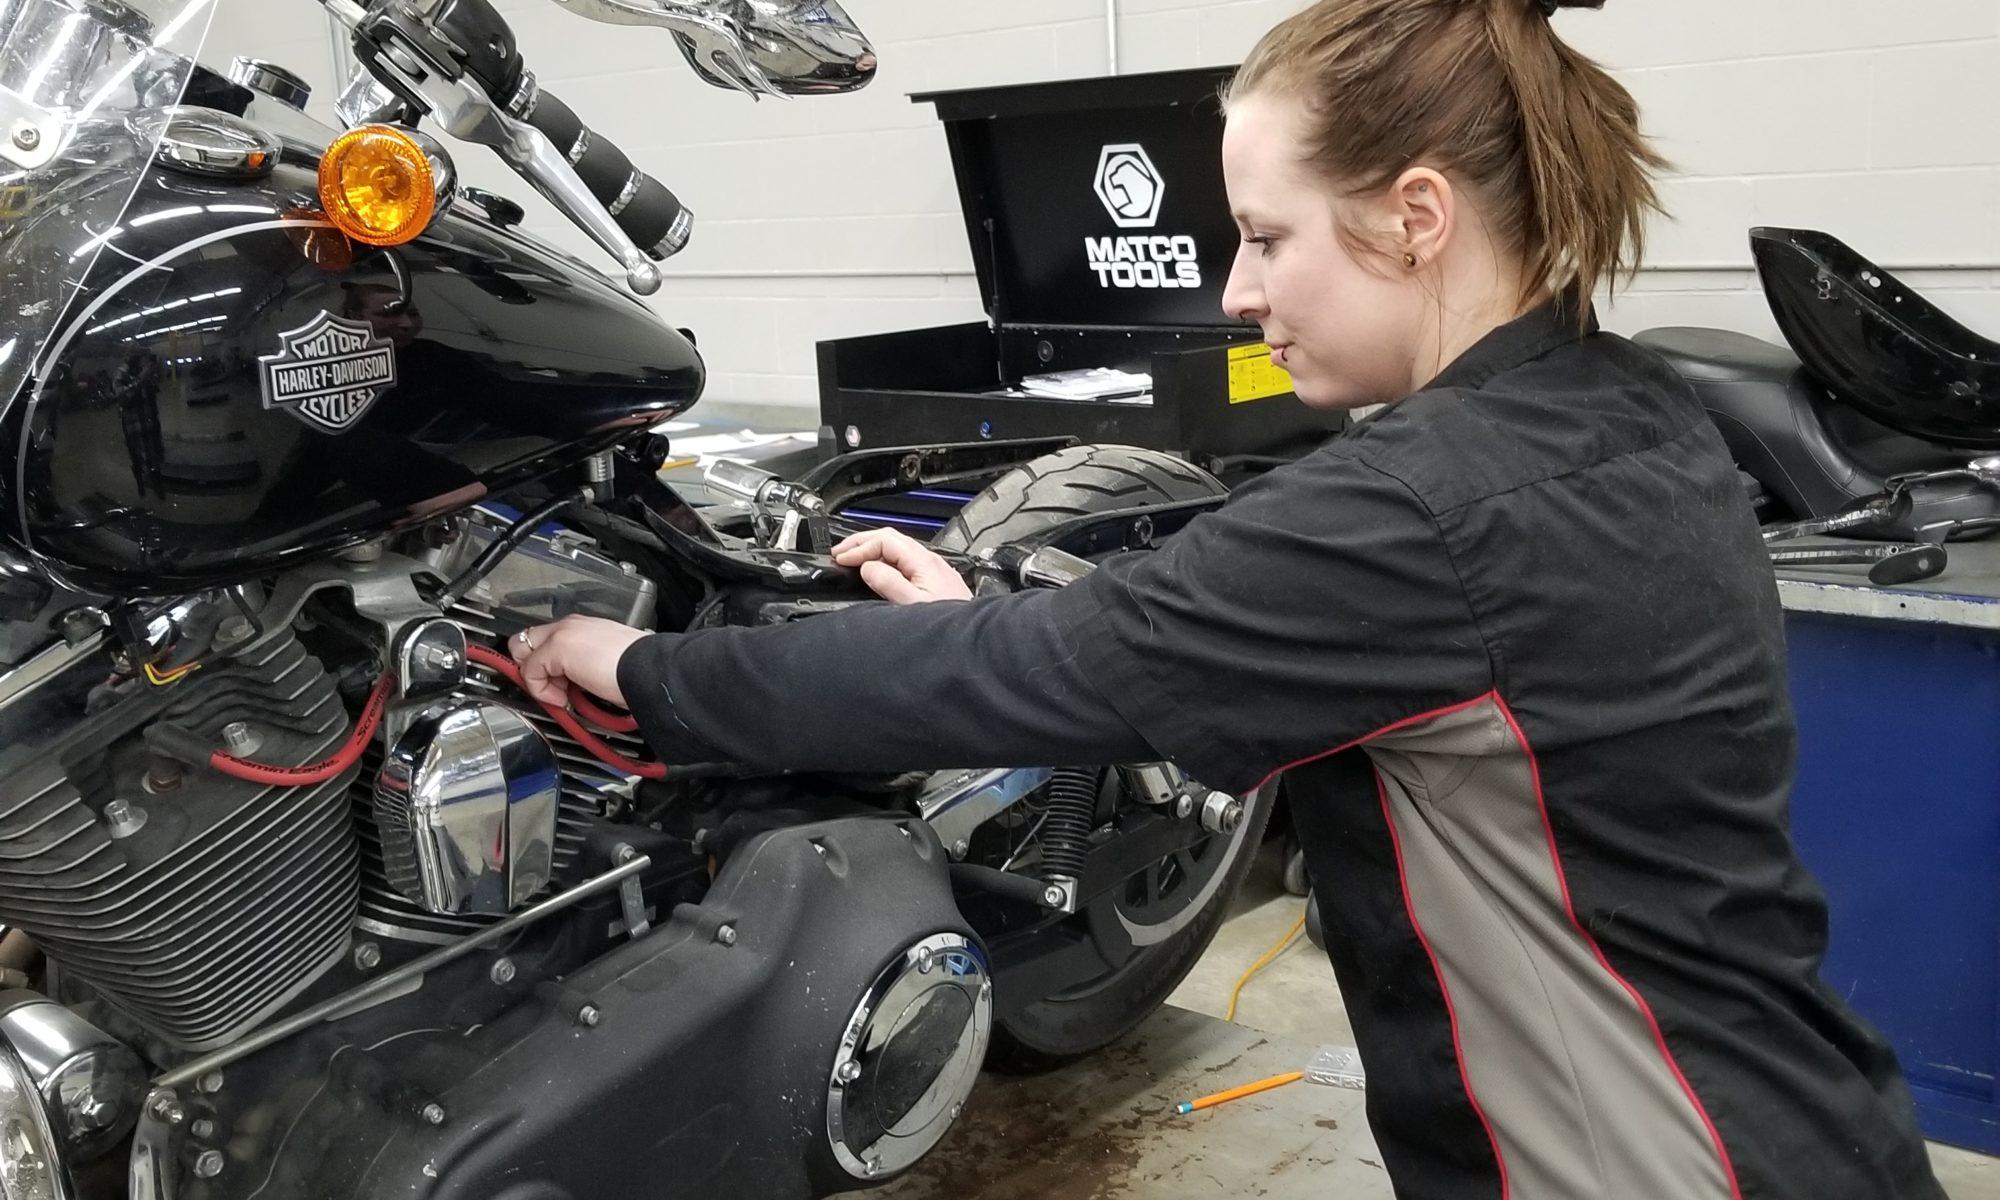 student working on a motorcycle